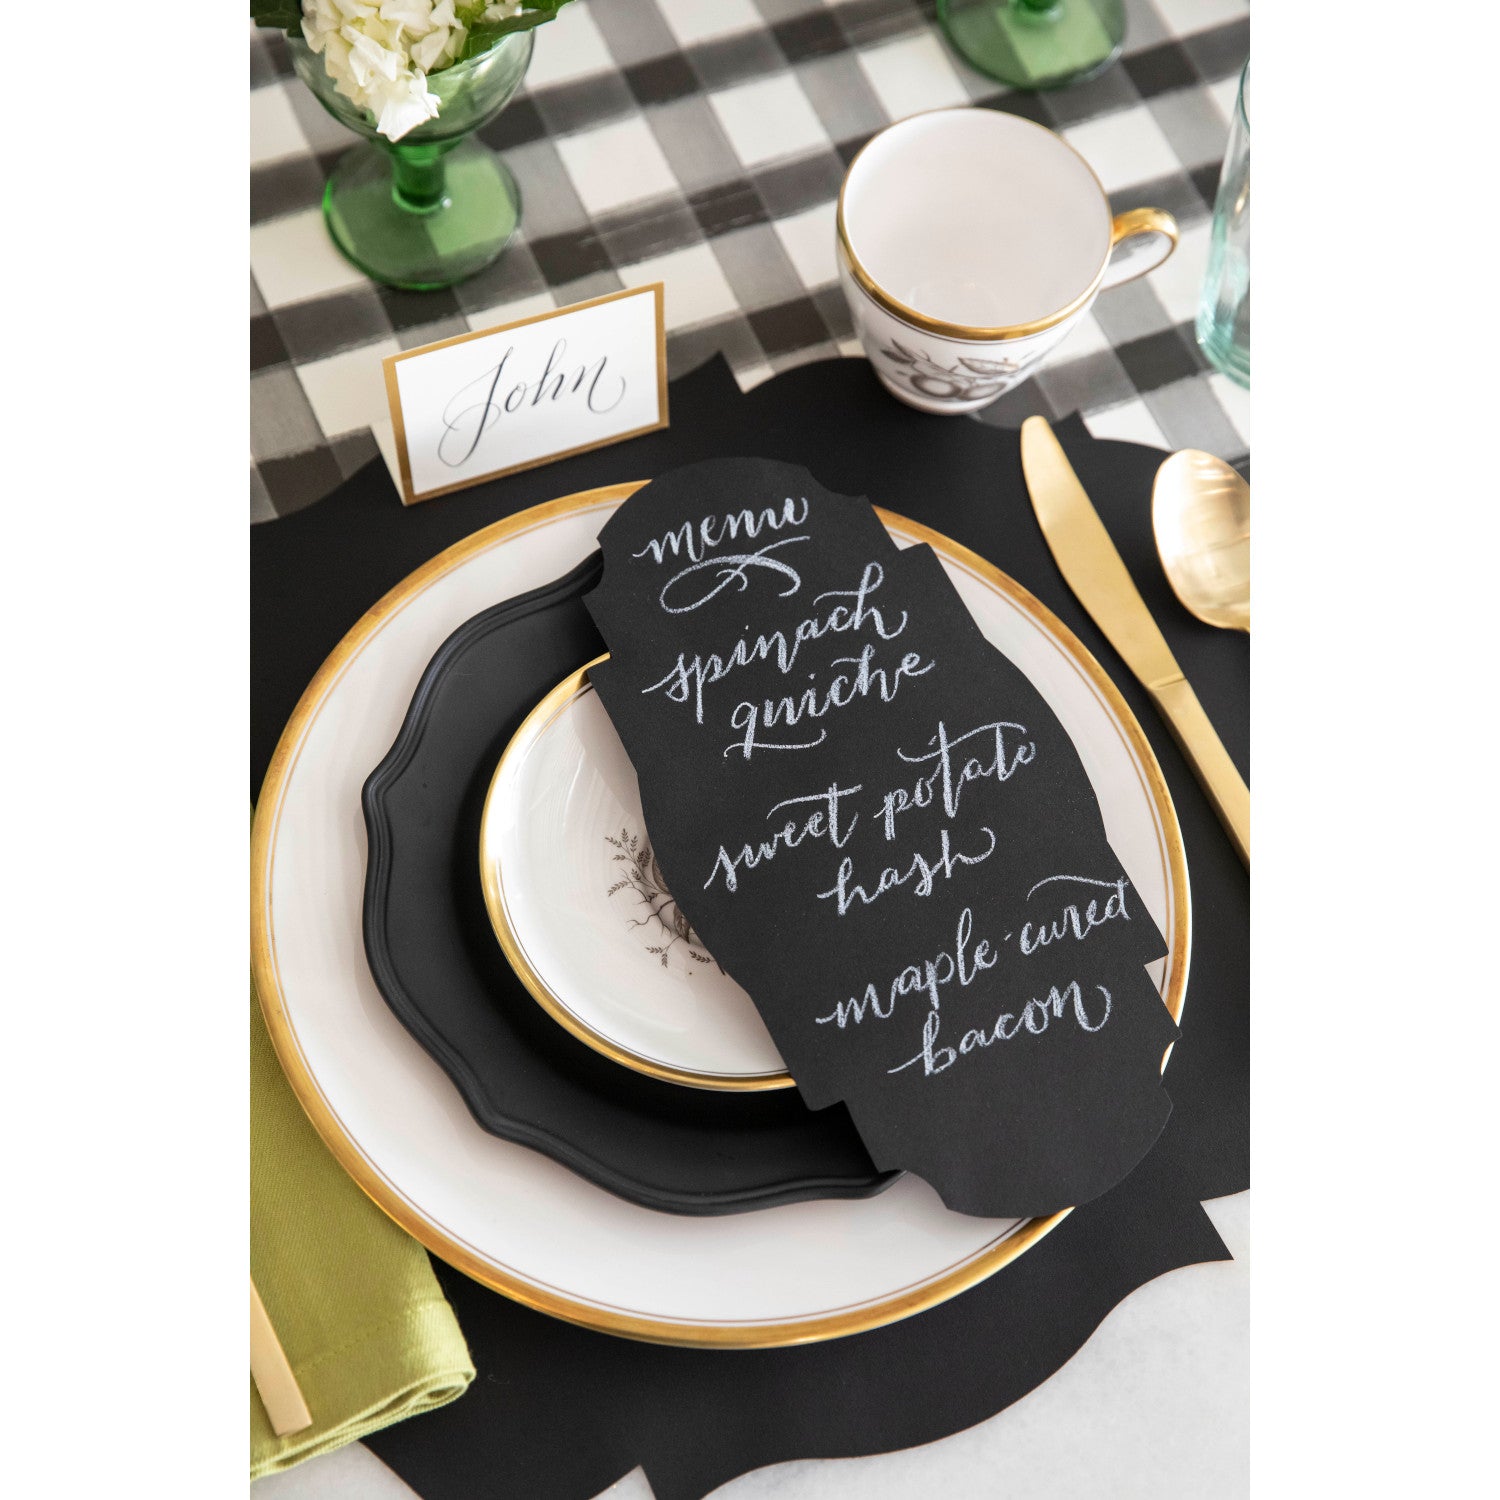 An elegant place setting featuring a Black Frame Table Accent resting on the plate with a menu hand-written in white script.